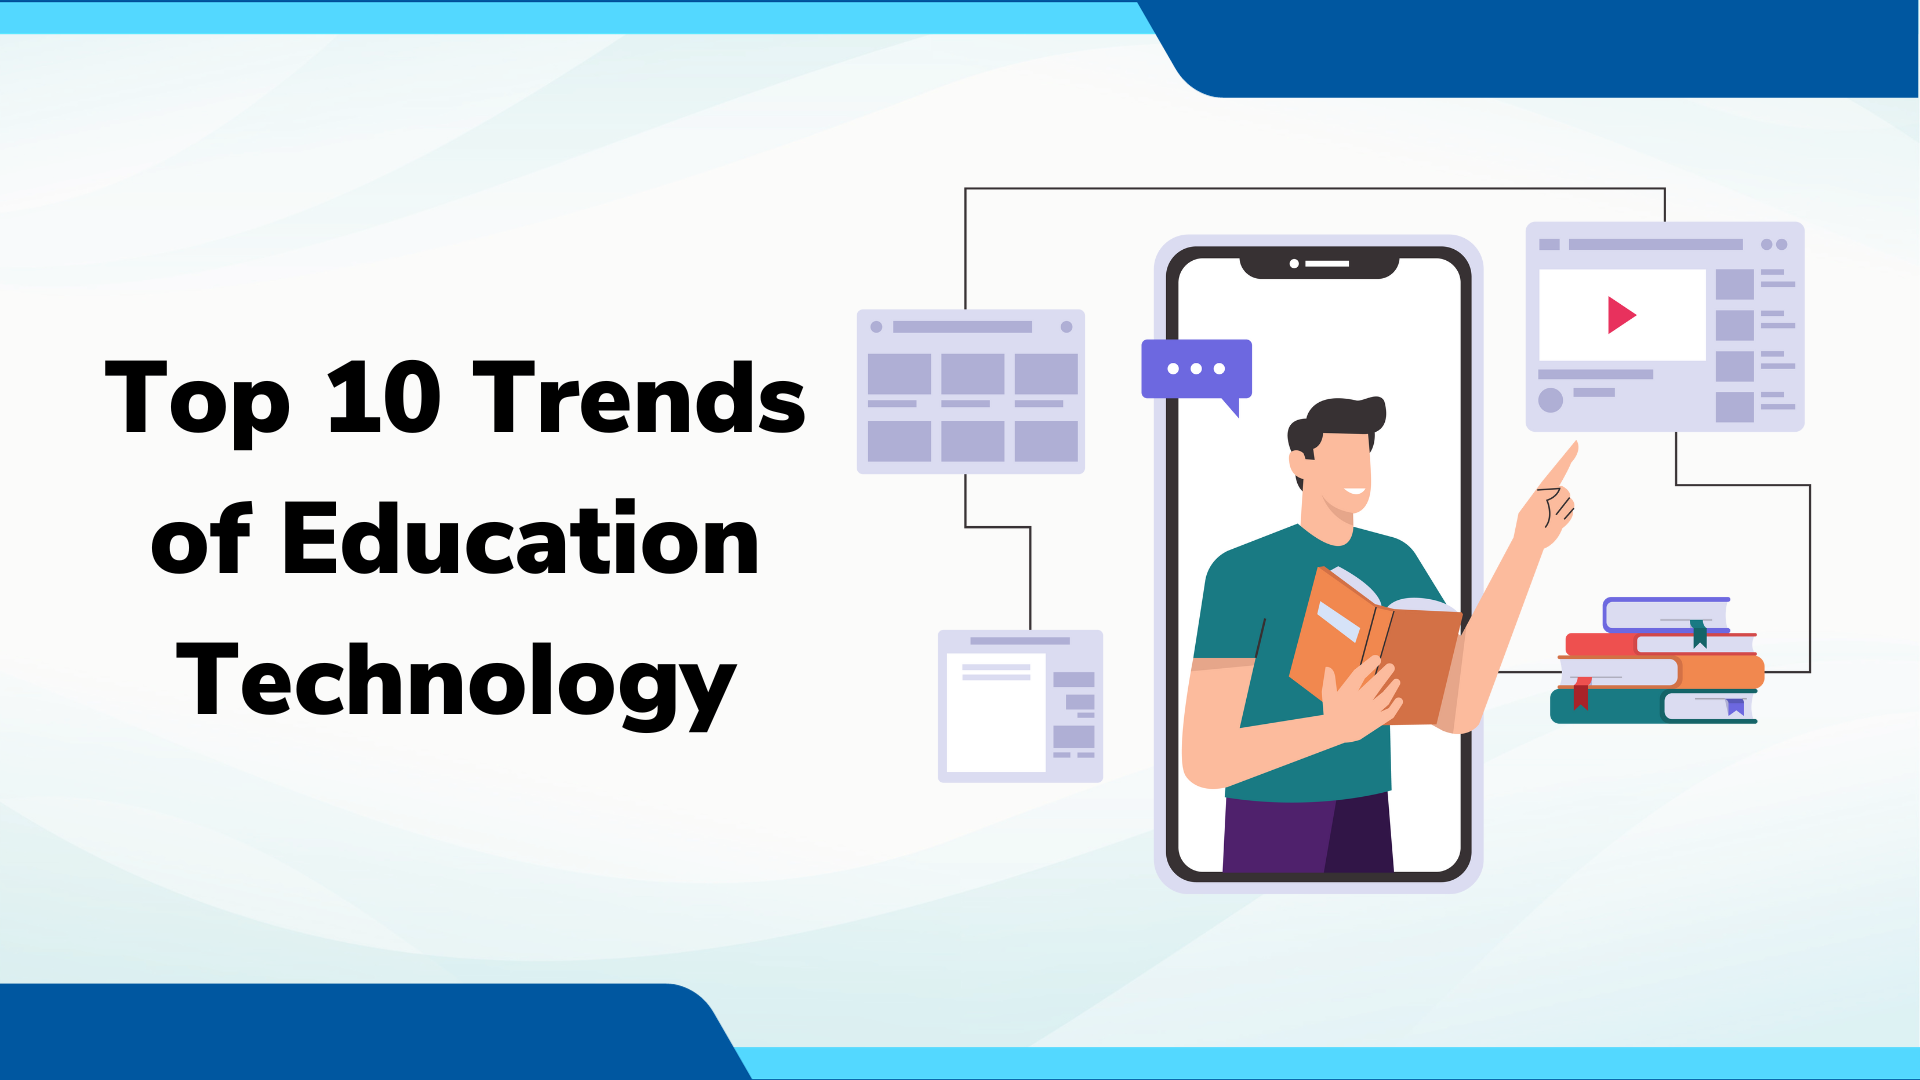 Top 10 Trends of Education Technology